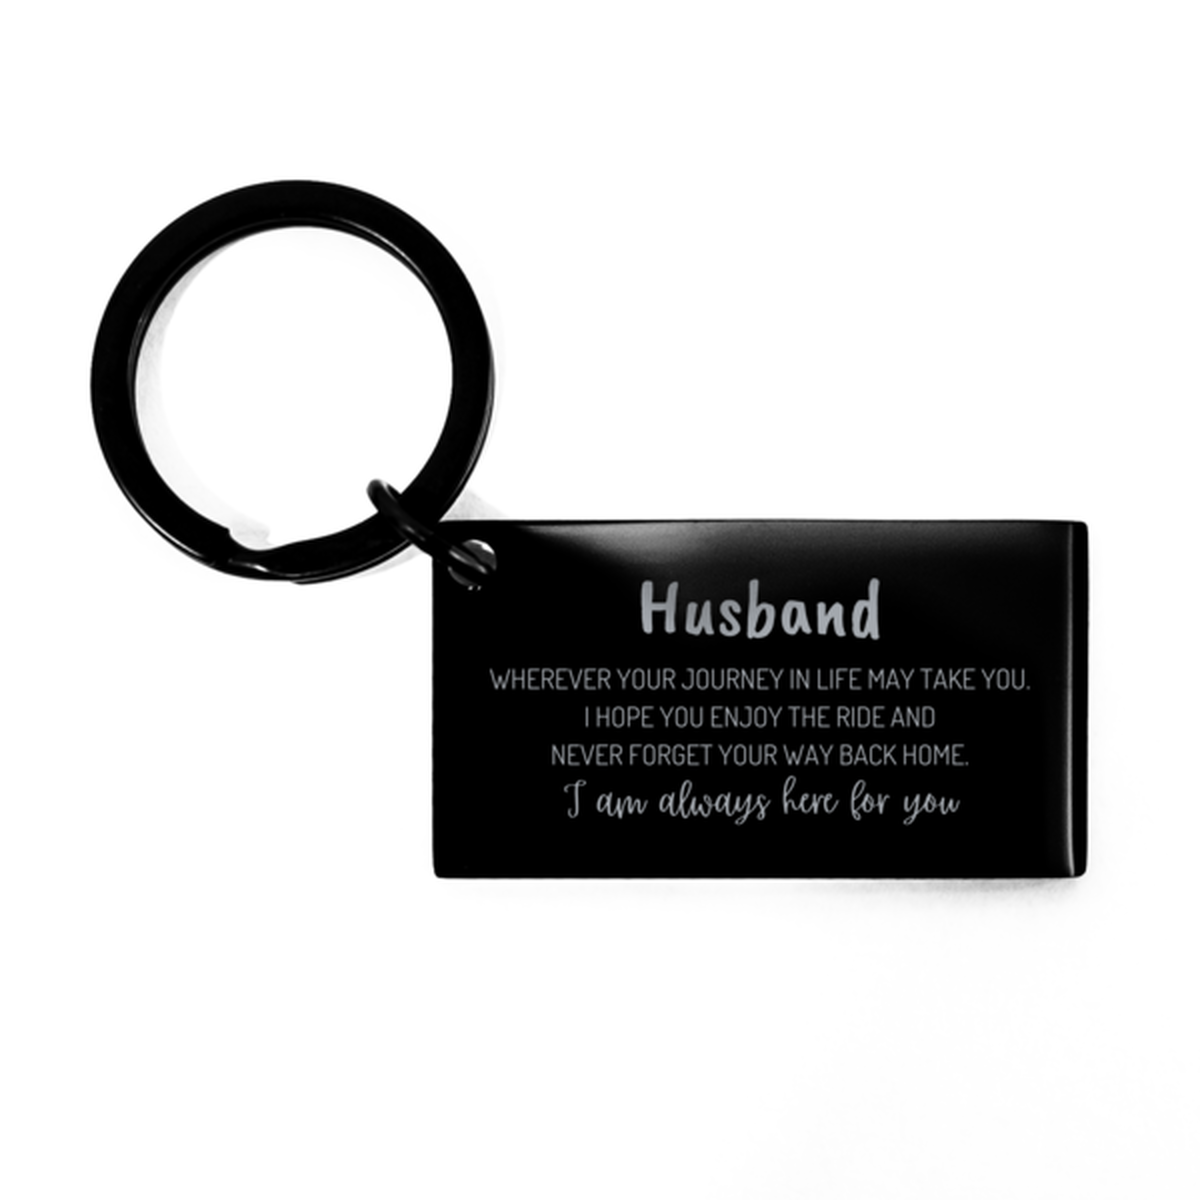 Husband wherever your journey in life may take you, I am always here for you Husband Keychain, Awesome Christmas Gifts For Husband, Husband Birthday Gifts for Men Women Family Loved One